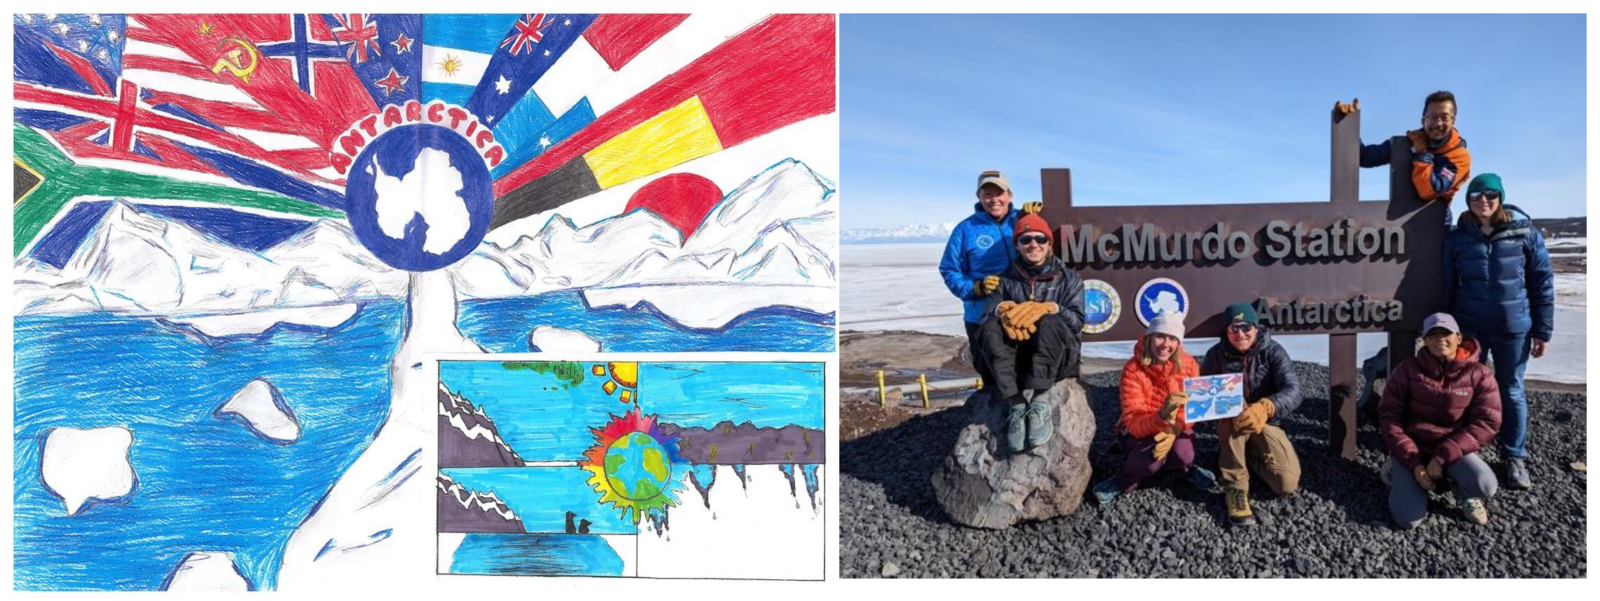 Right a painting of Antarctica and many different flags, right: Scientists at the McMurdo Station sign post.